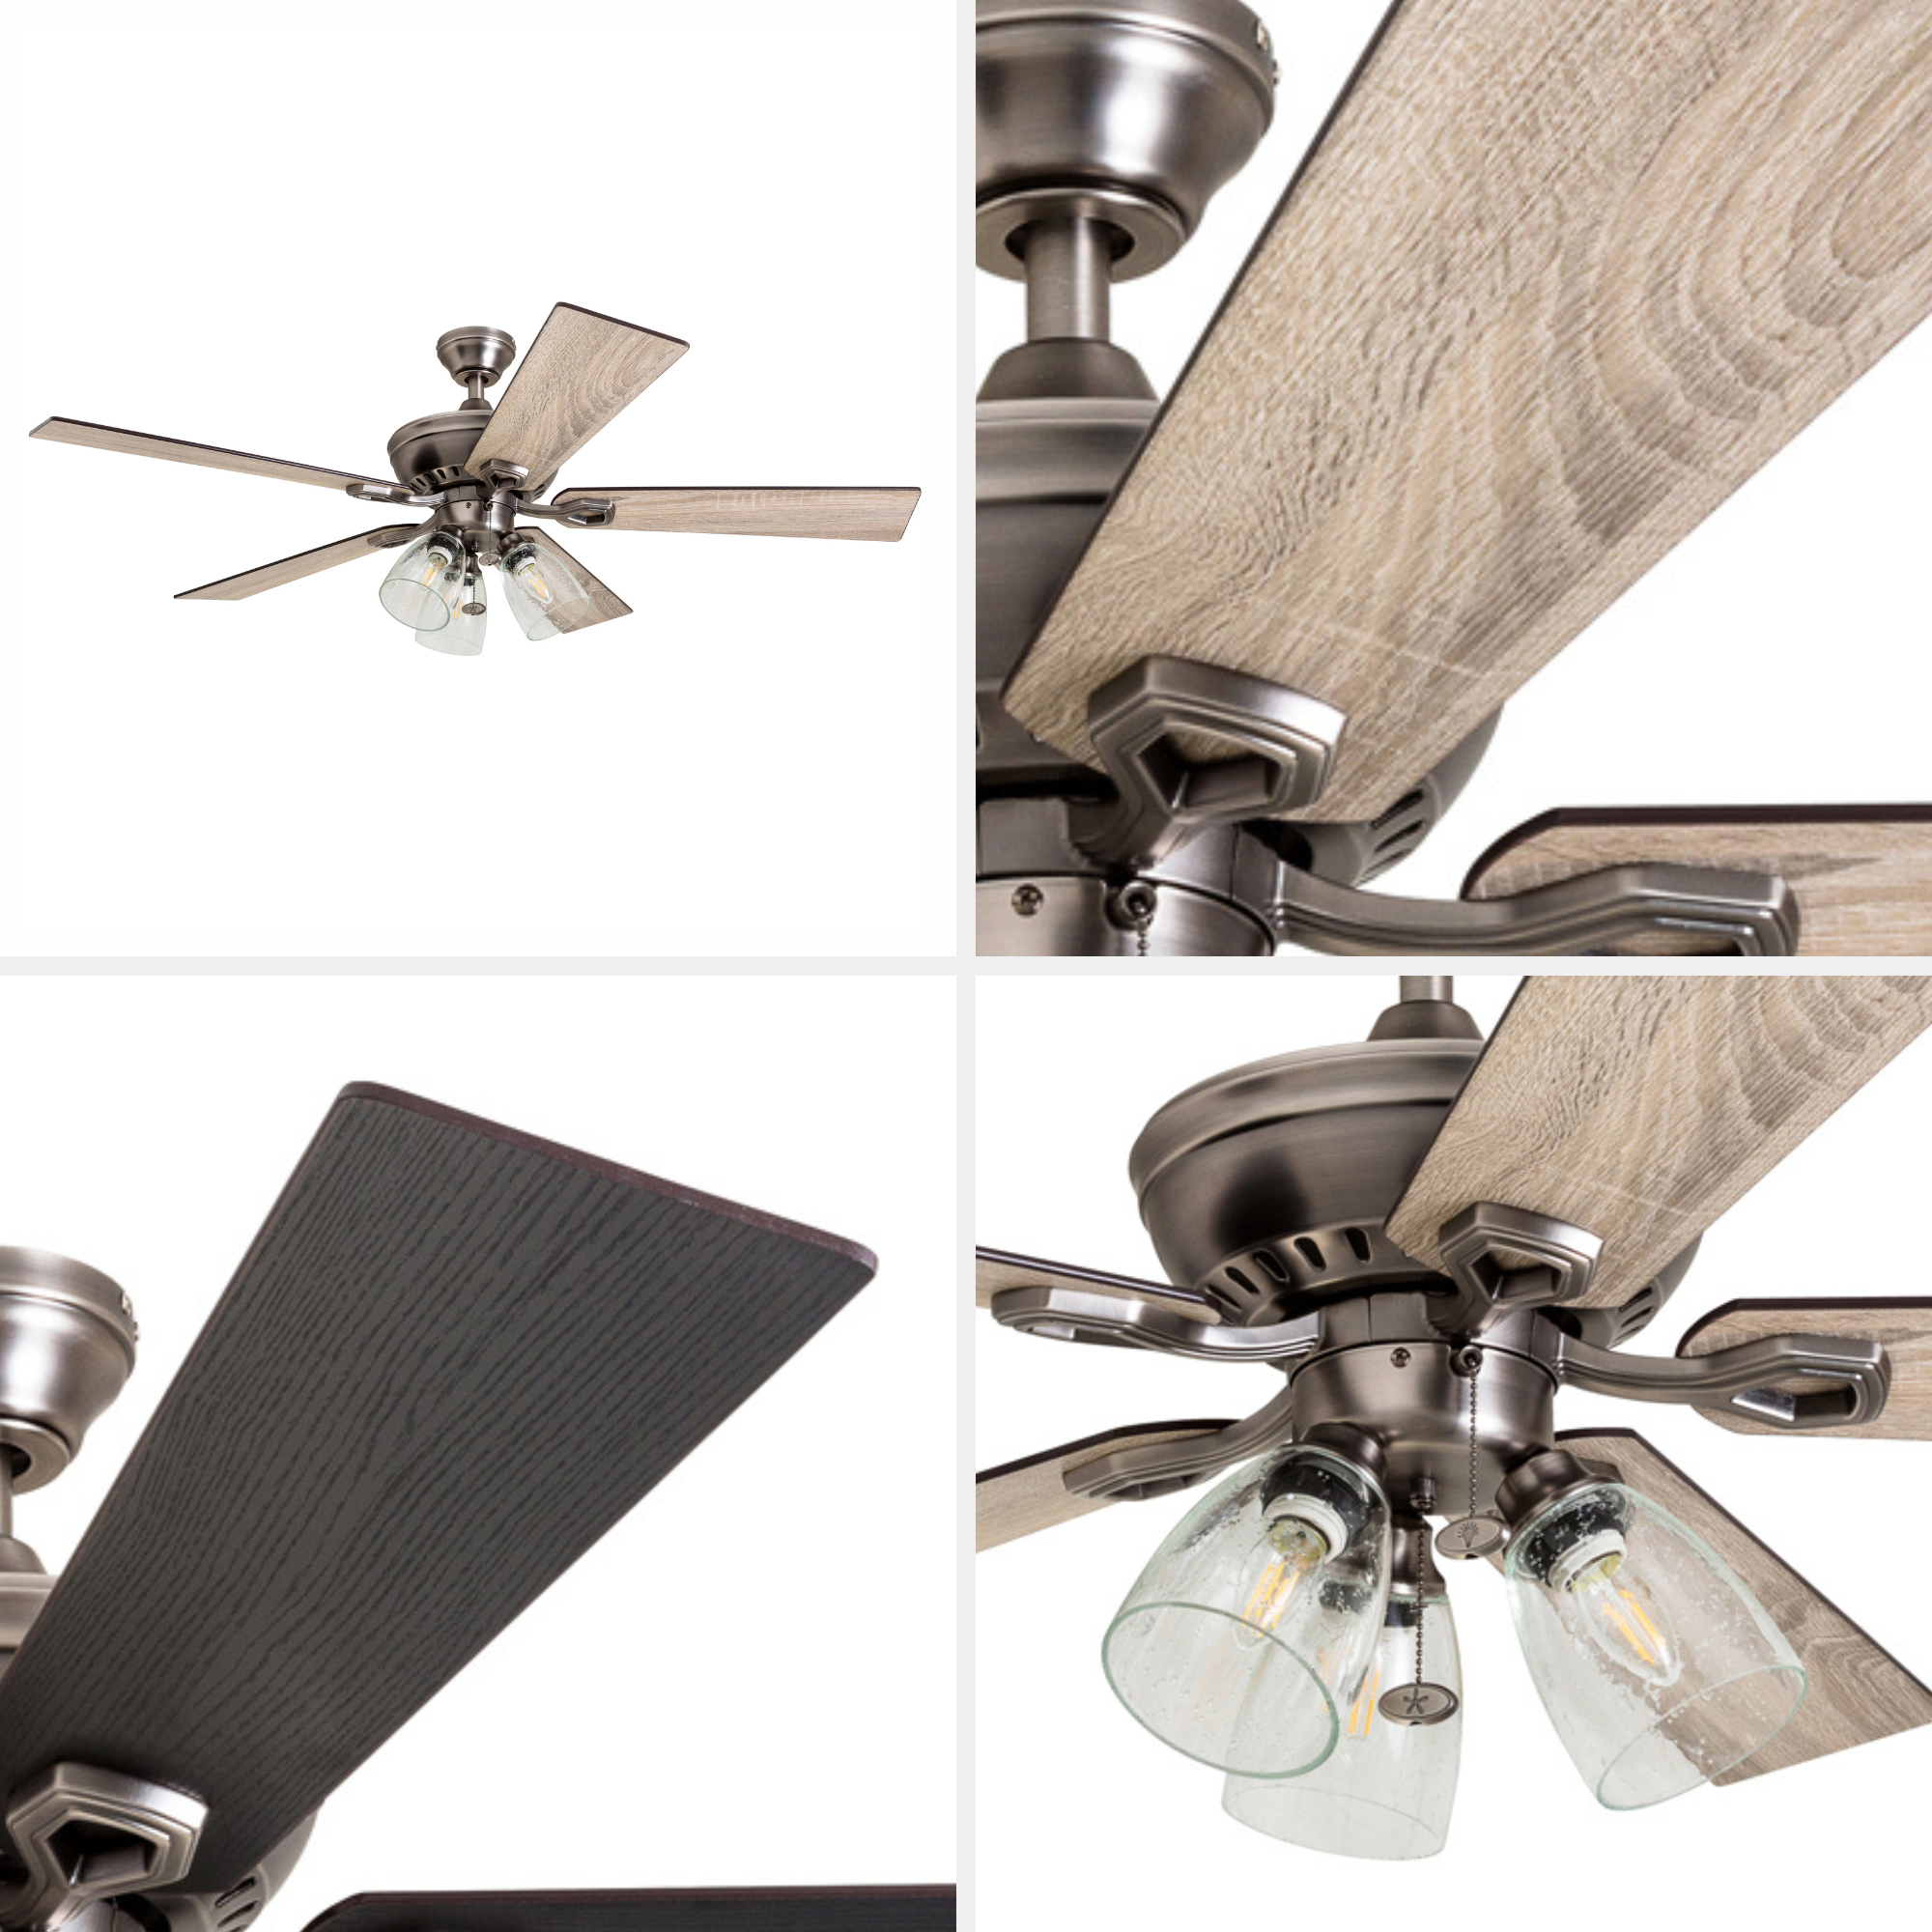 52 Inch Glenmont, Antique Pewter, Pull Chain, Ceiling Fan by Prominence Home